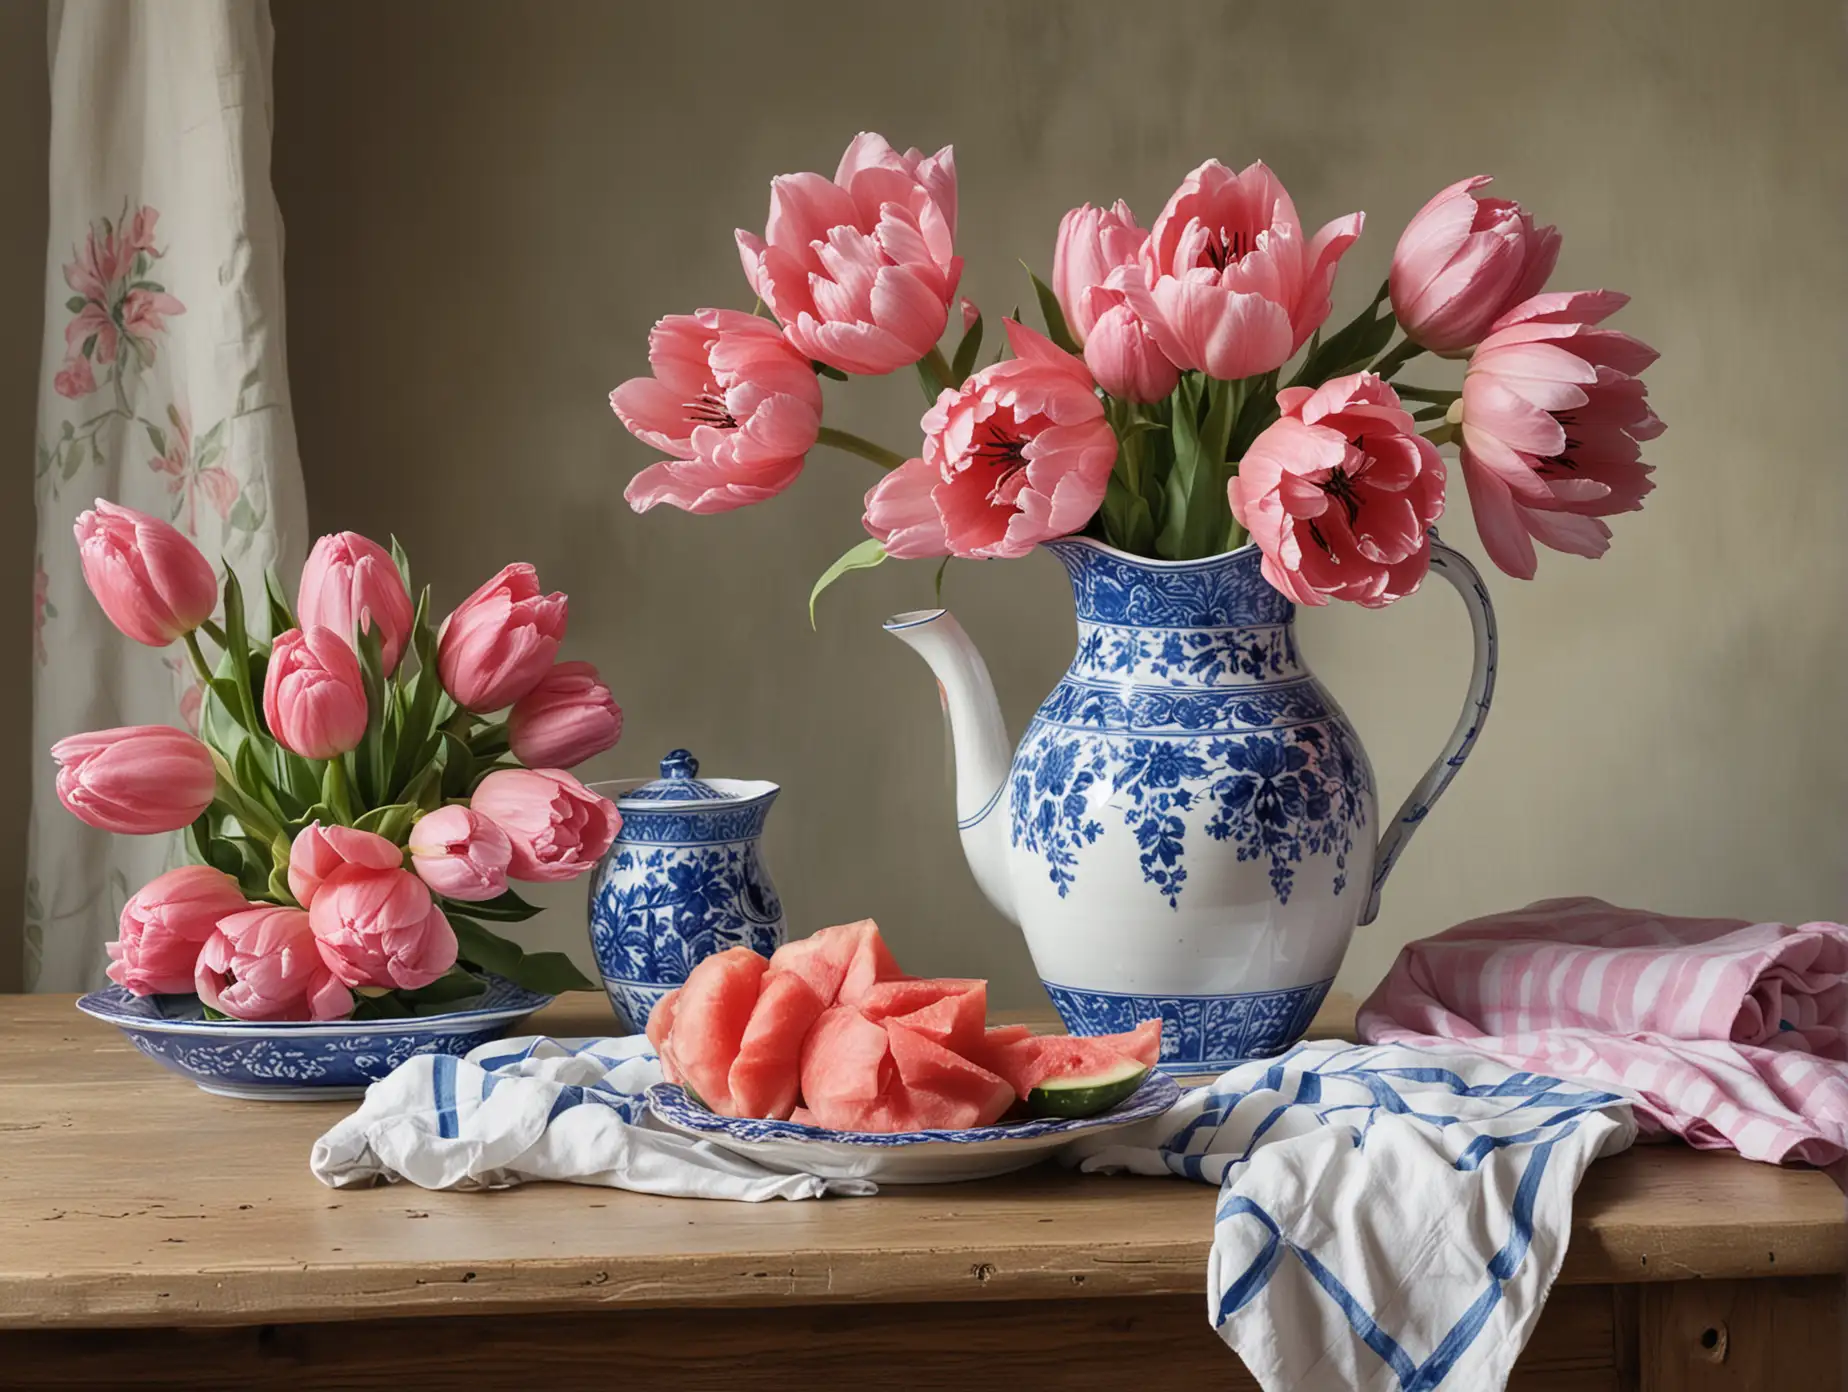 Charming Still Life Painting Blue and White China Pitcher Watermelon Slice and Pink Tulips